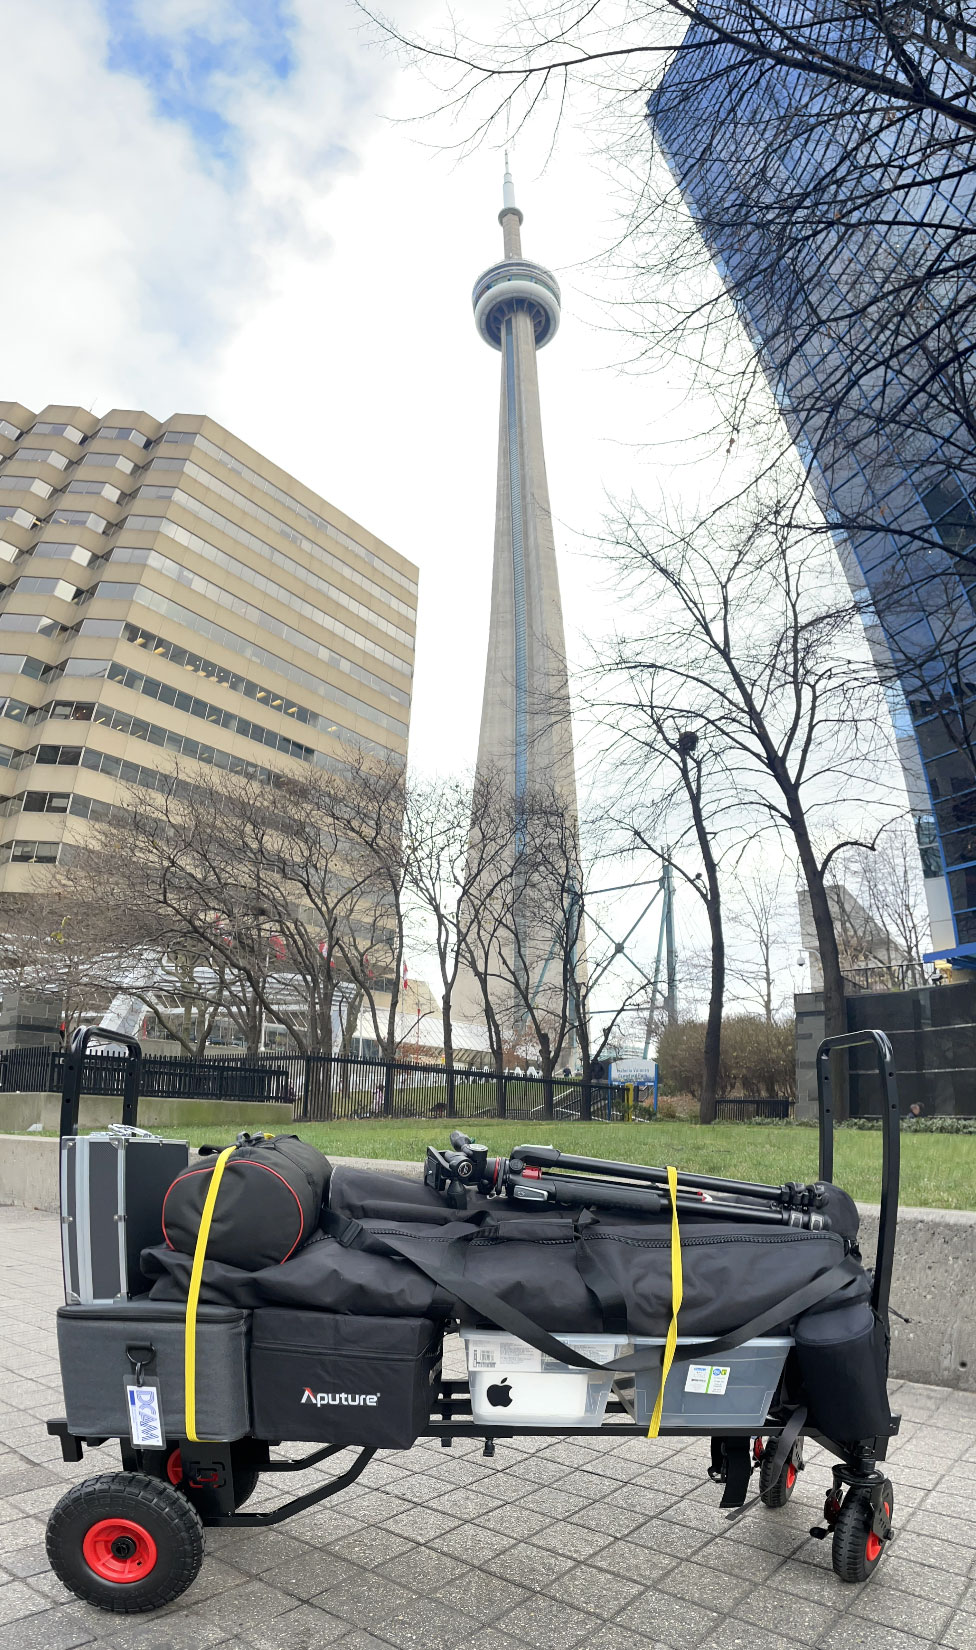 A still photograph of our equipment cart parked in front of the CN Tower just after finishing a video production in Downtown Toronto